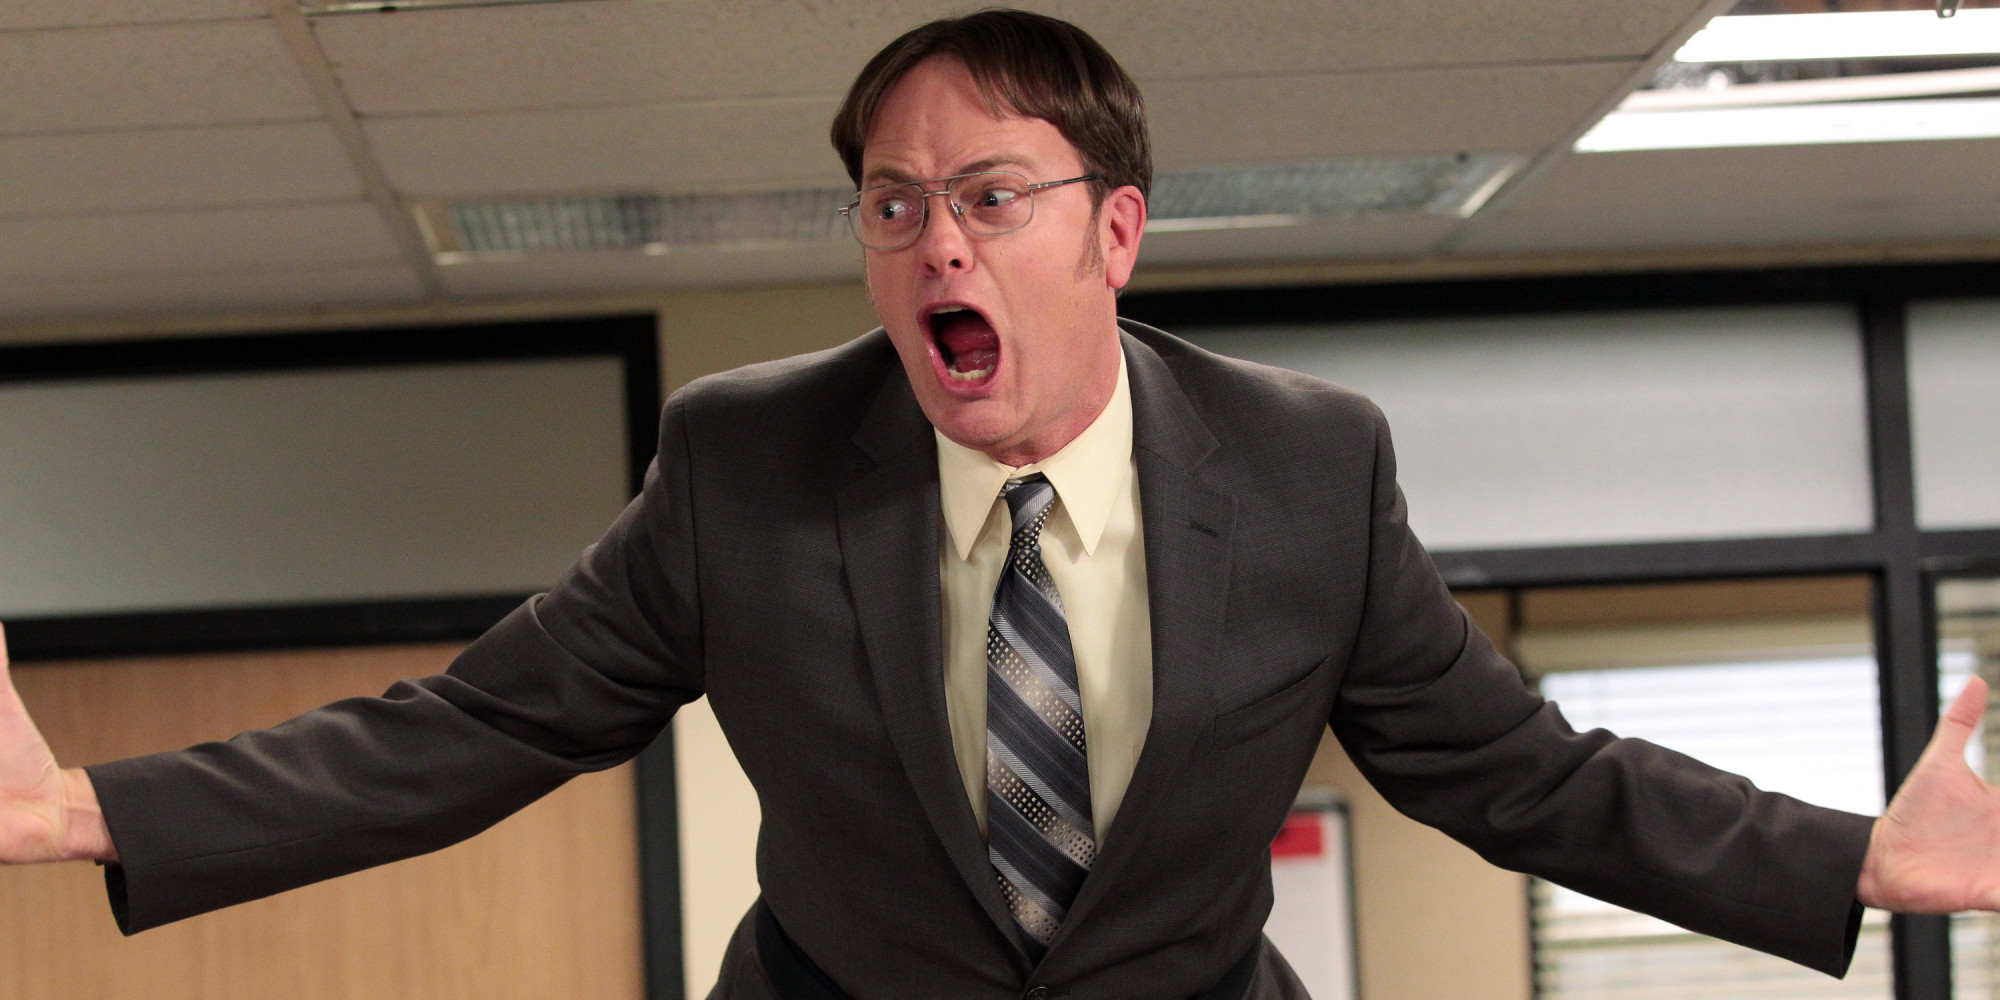 dwight schrute yelling angry Blank Meme Template